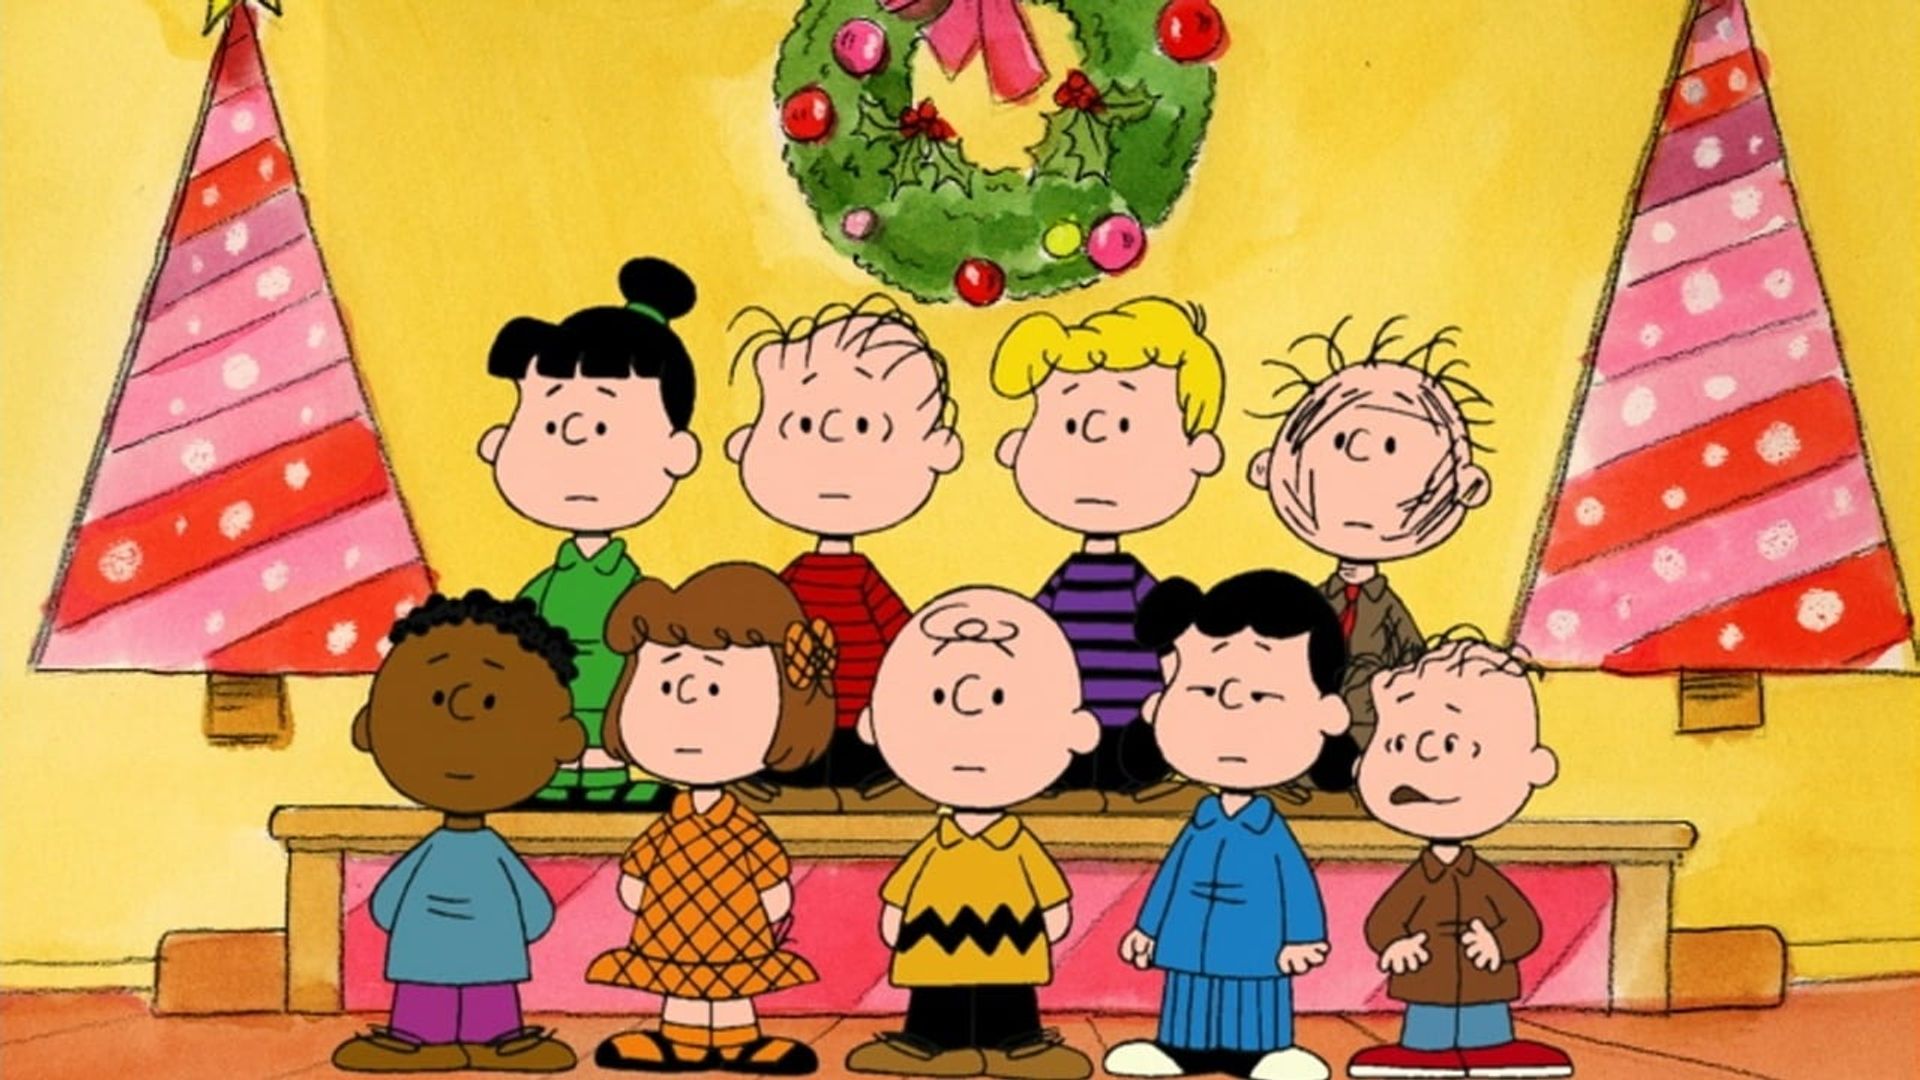 The Making of 'A Charlie Brown Christmas' background